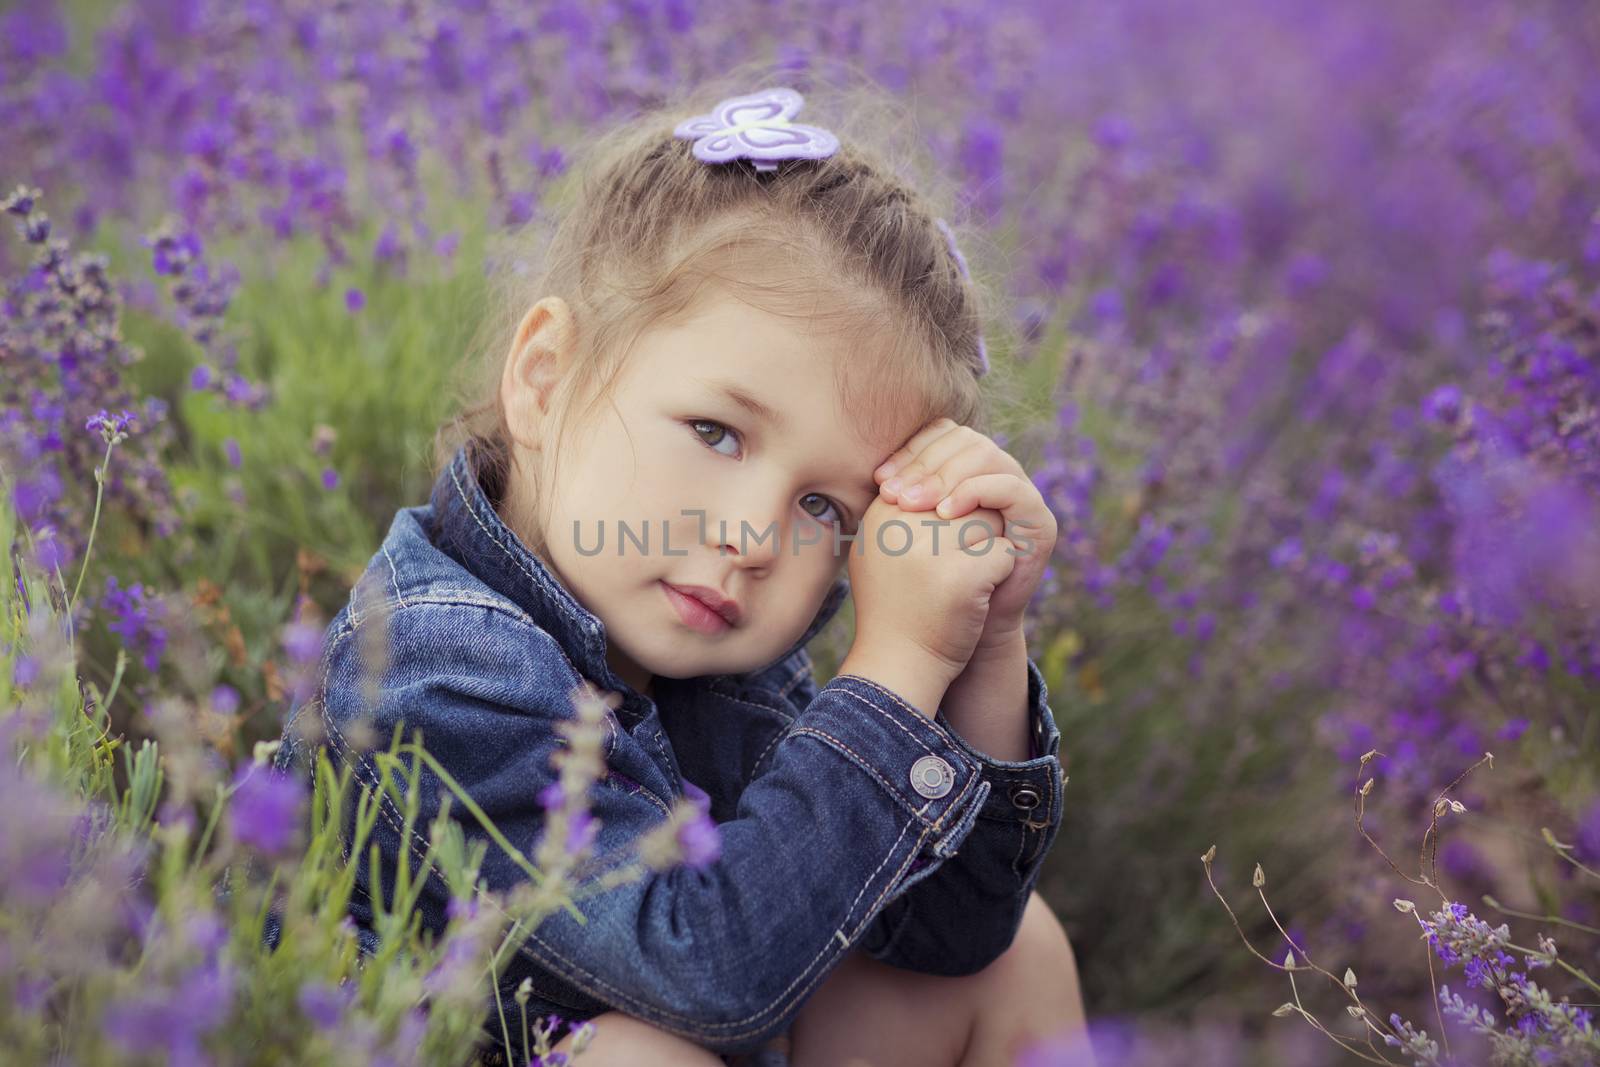 Pretty young girl sitting in lavender field in nice hat boater with purple flower on it